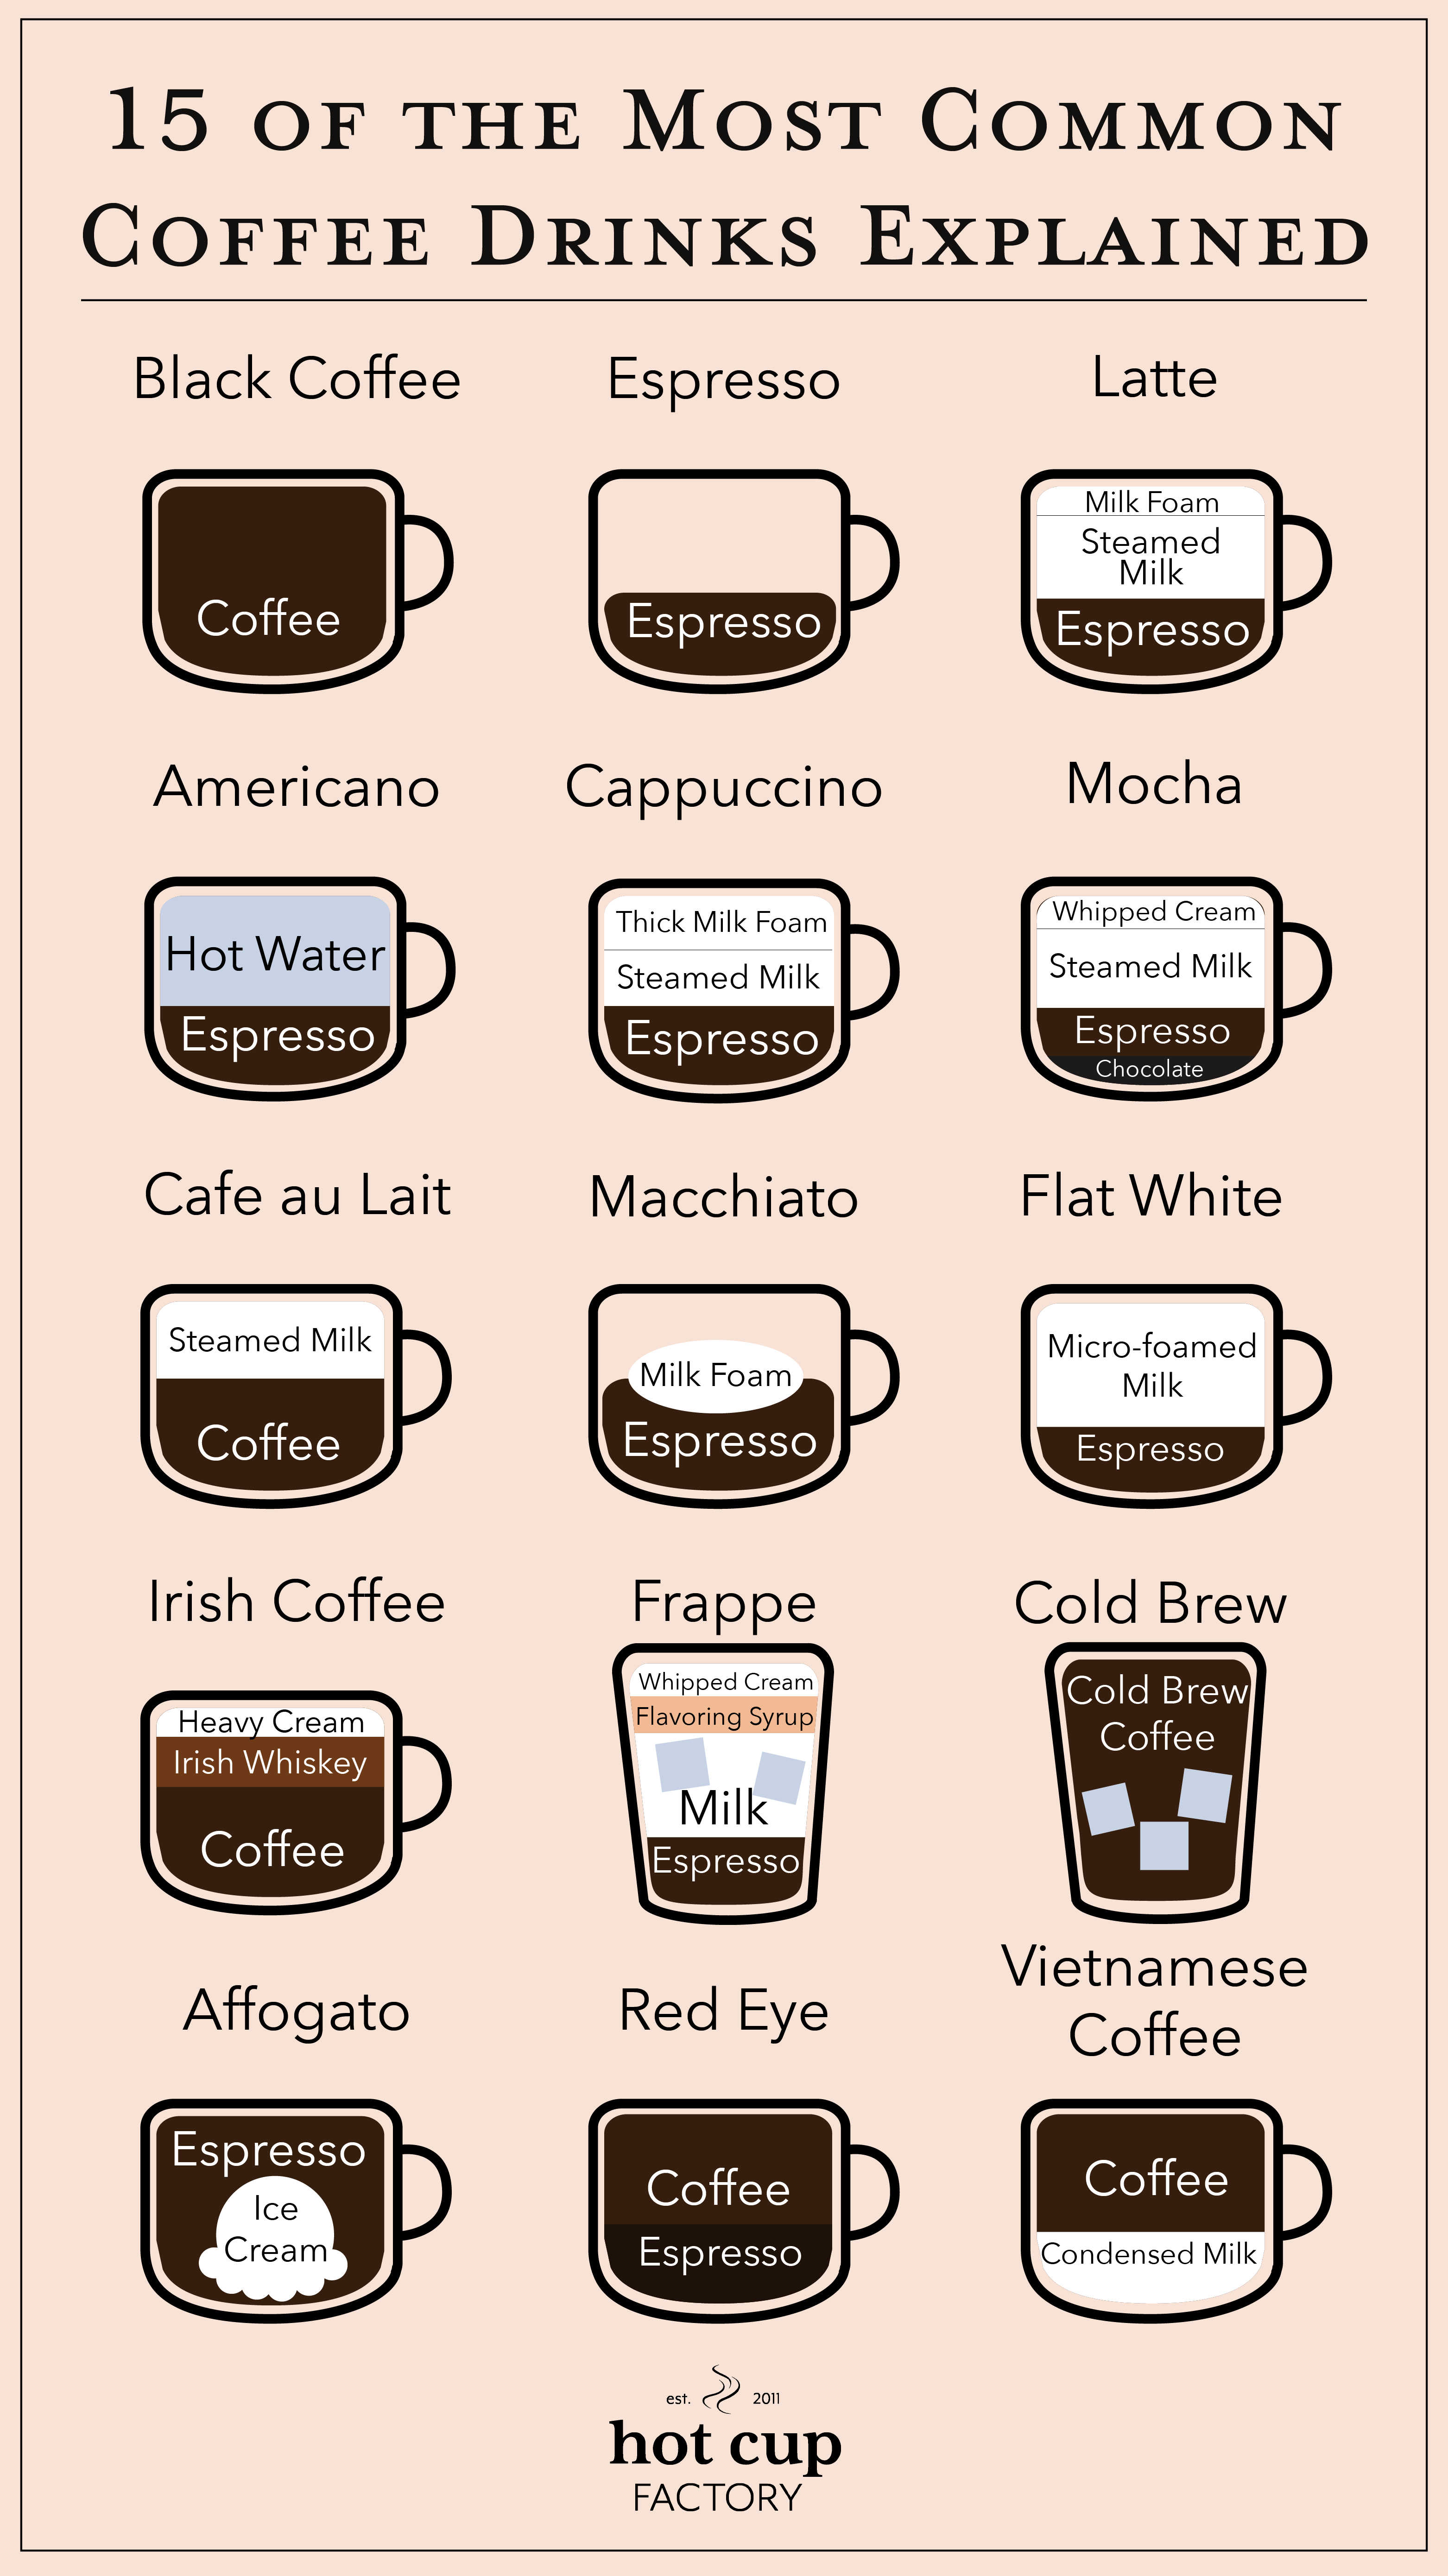 Coffee Drink Guide, 15 of the Most Common Coffee Drinks Explained